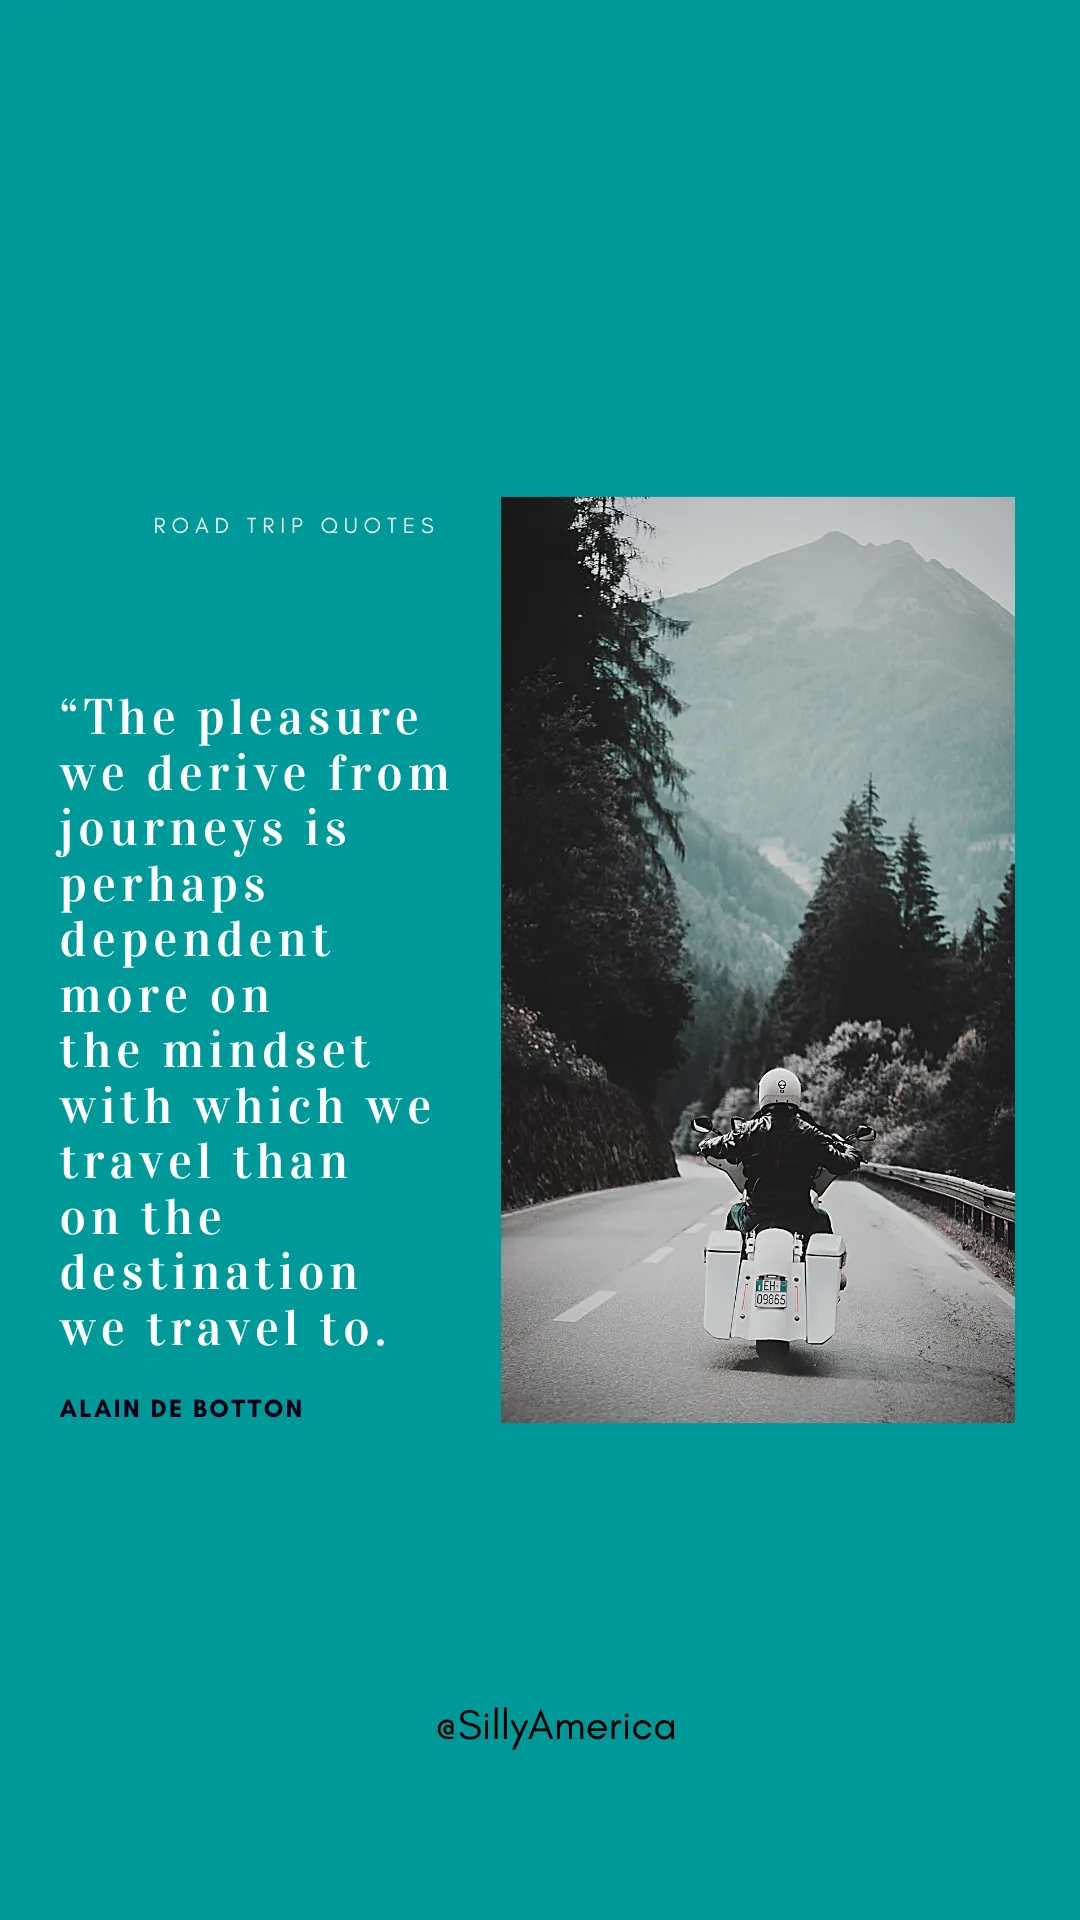 “The pleasure we derive from journeys is perhaps dependent more on the mindset with which we travel than on the destination we travel to.” Alain de Botton, The Art of Travel